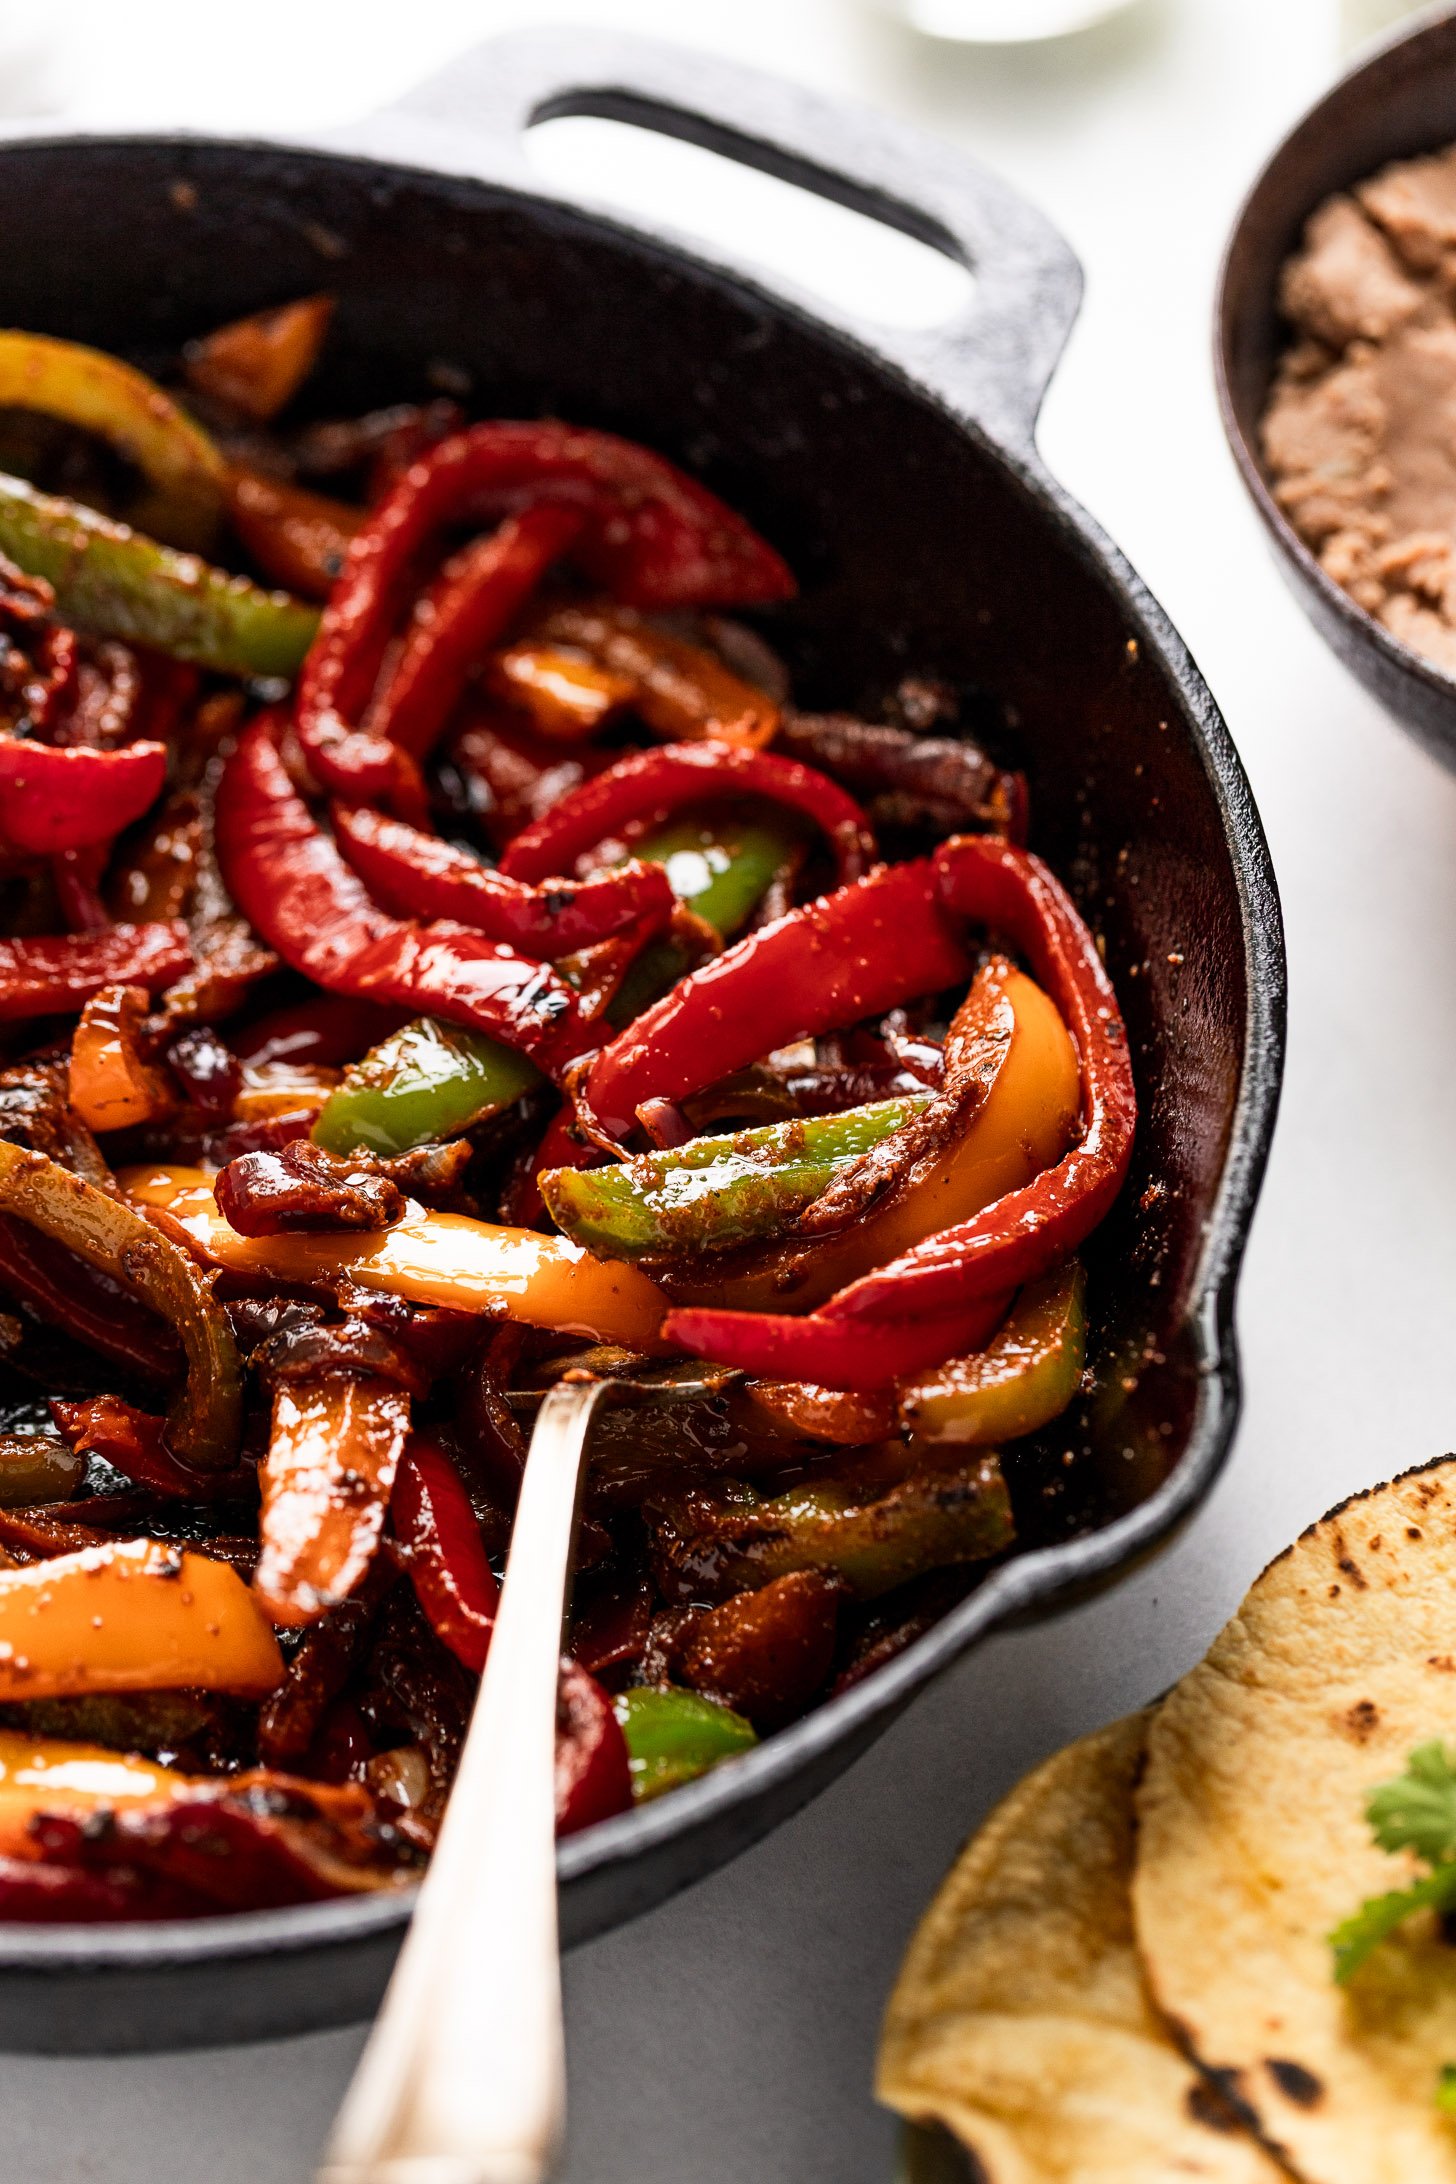 Fajita veggies in pan tossed with sauce with a serving spoon.